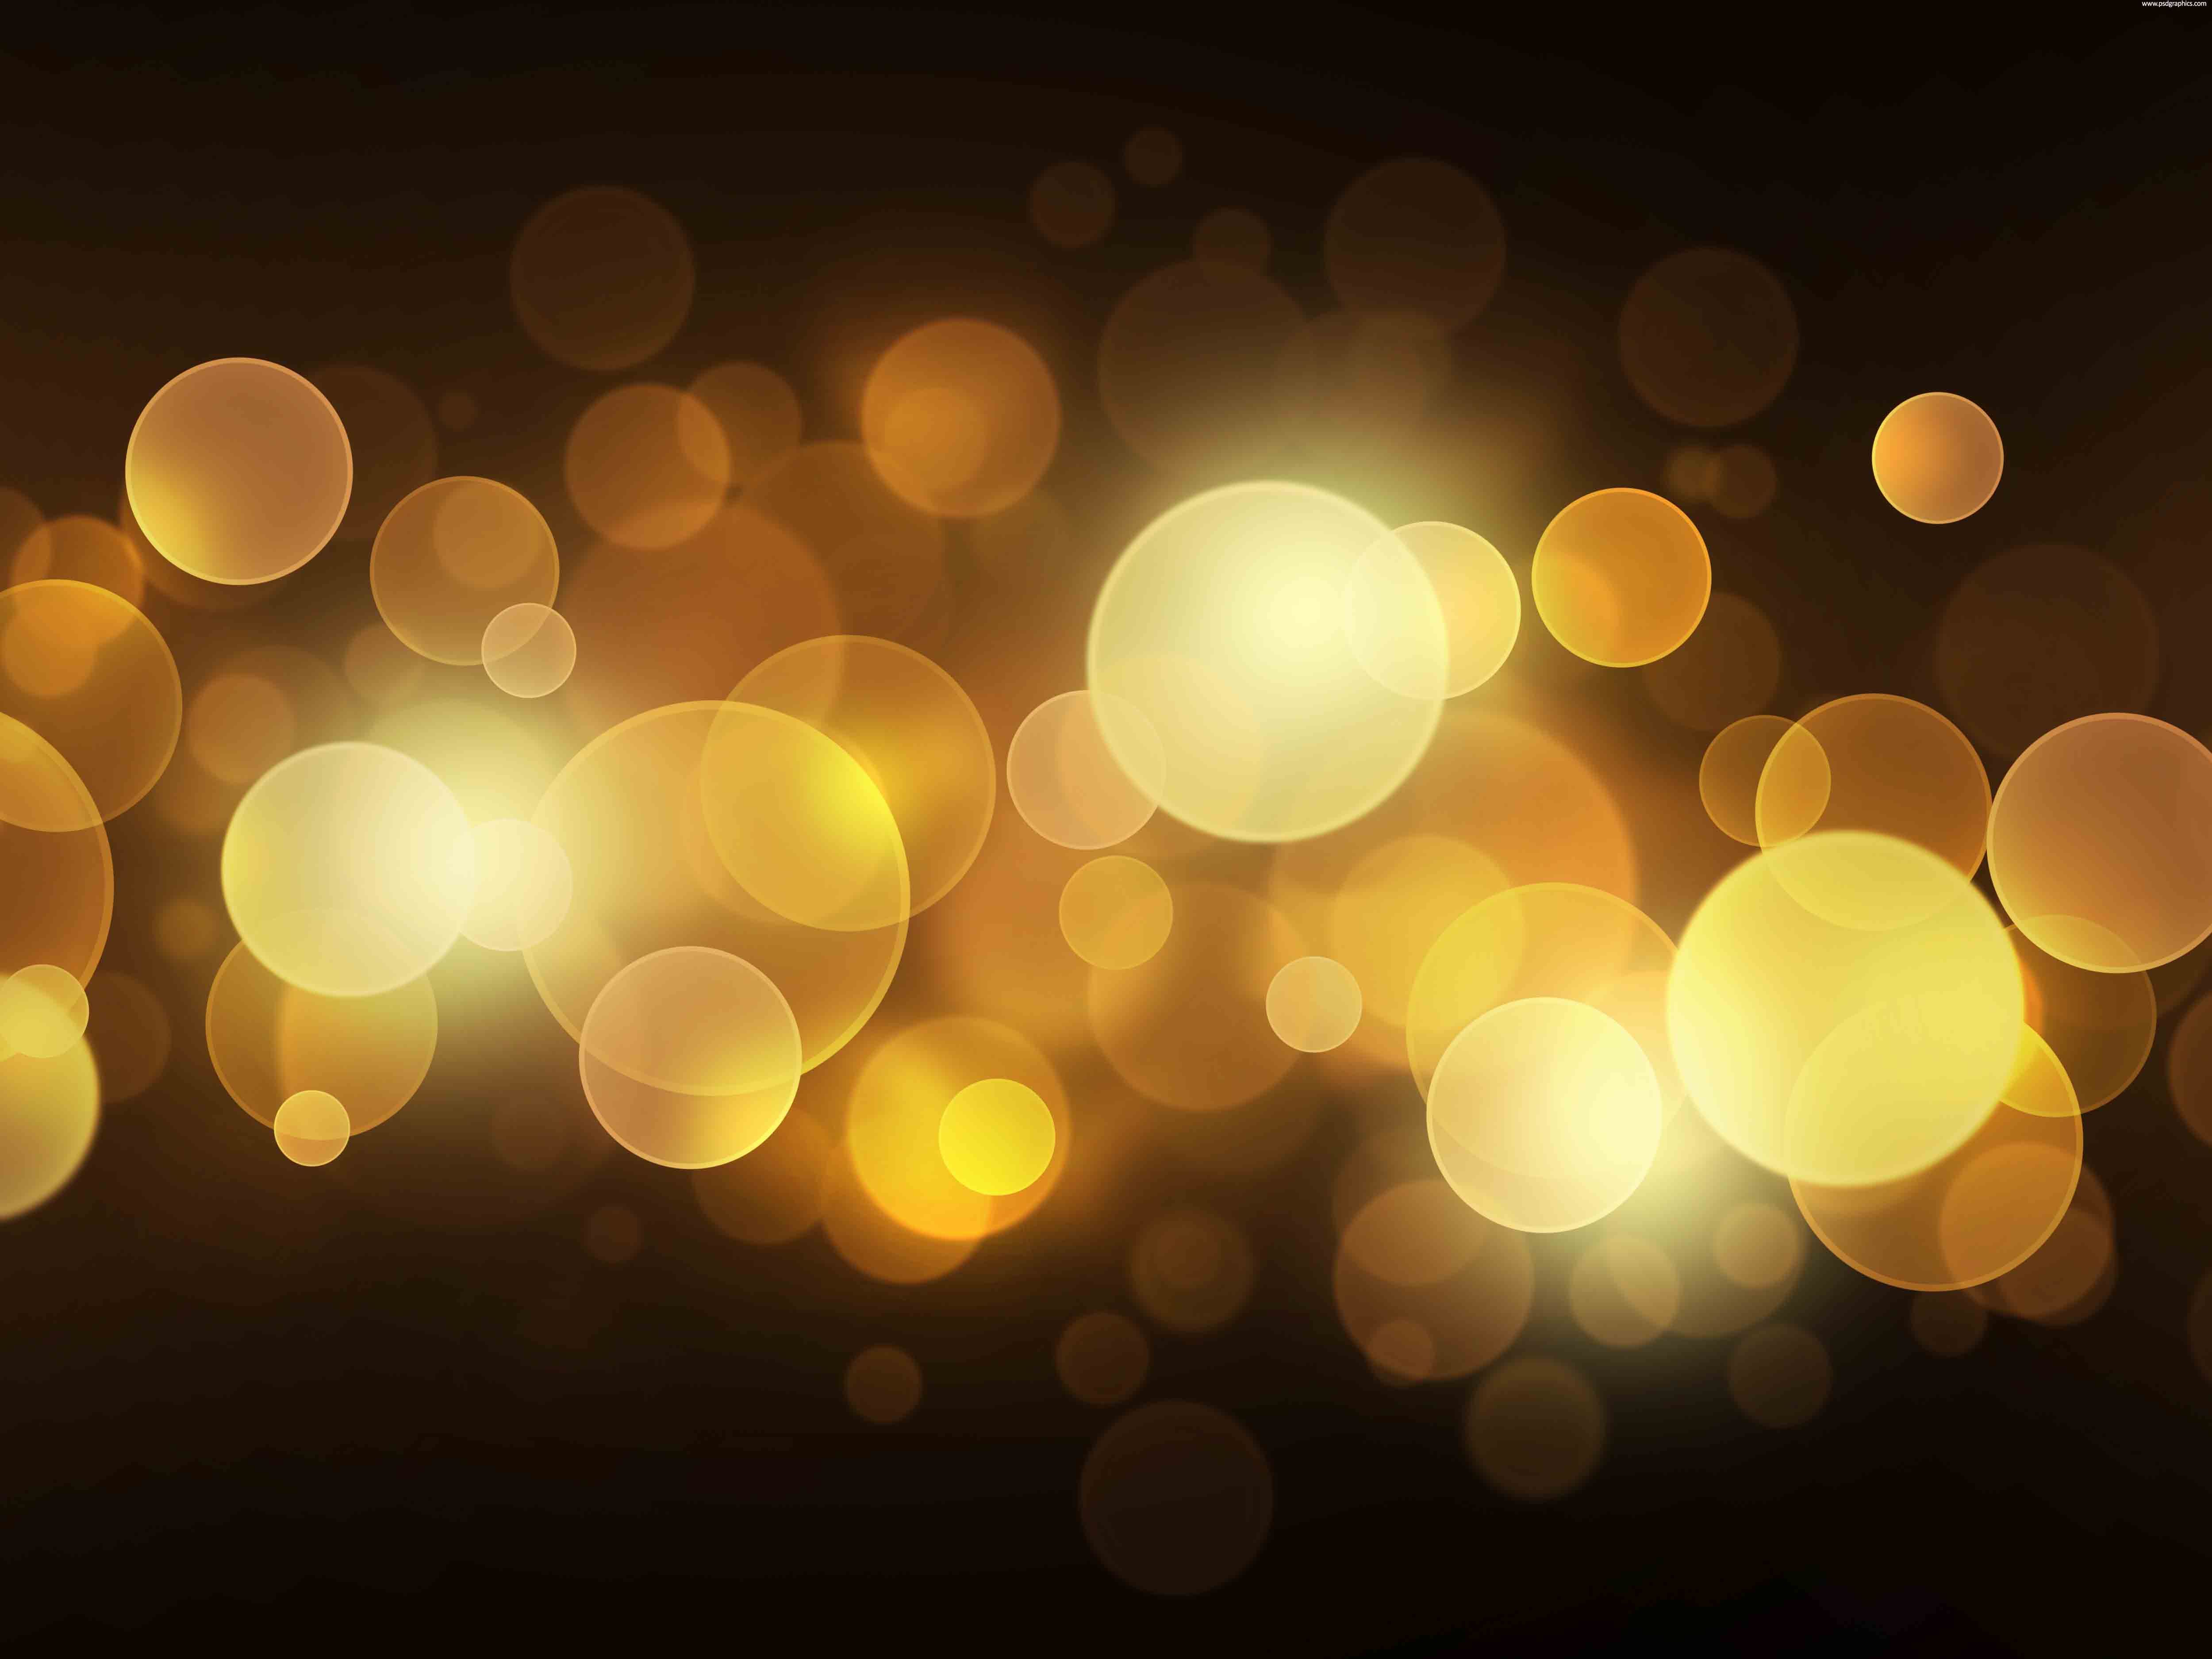 Bokeh Background Hd Wallpapers Free Download | HD wallpapers ...